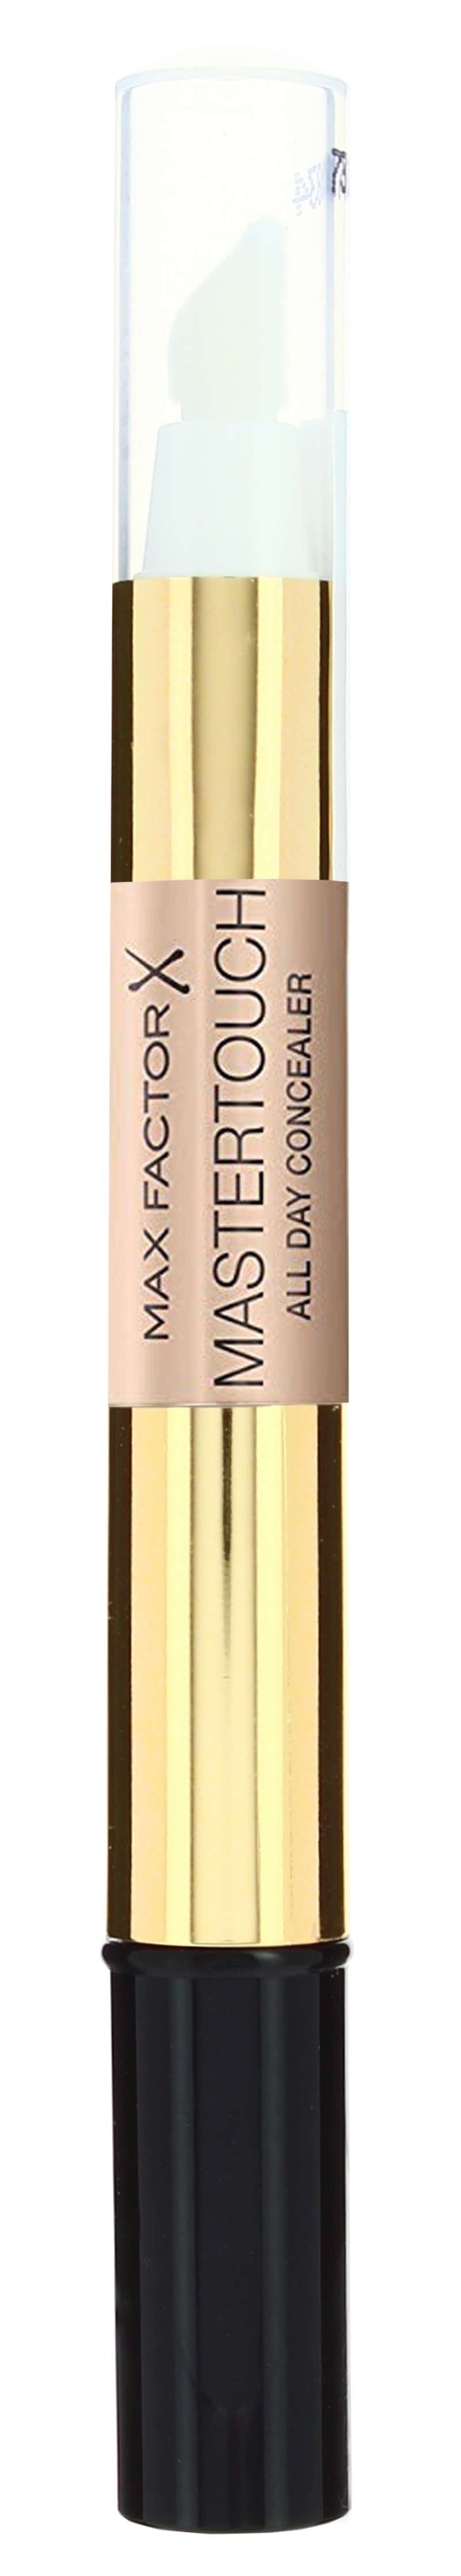 Turbulens Avenue imod Max Factor - Mastertouch Concealer Ivory 303 3 ml